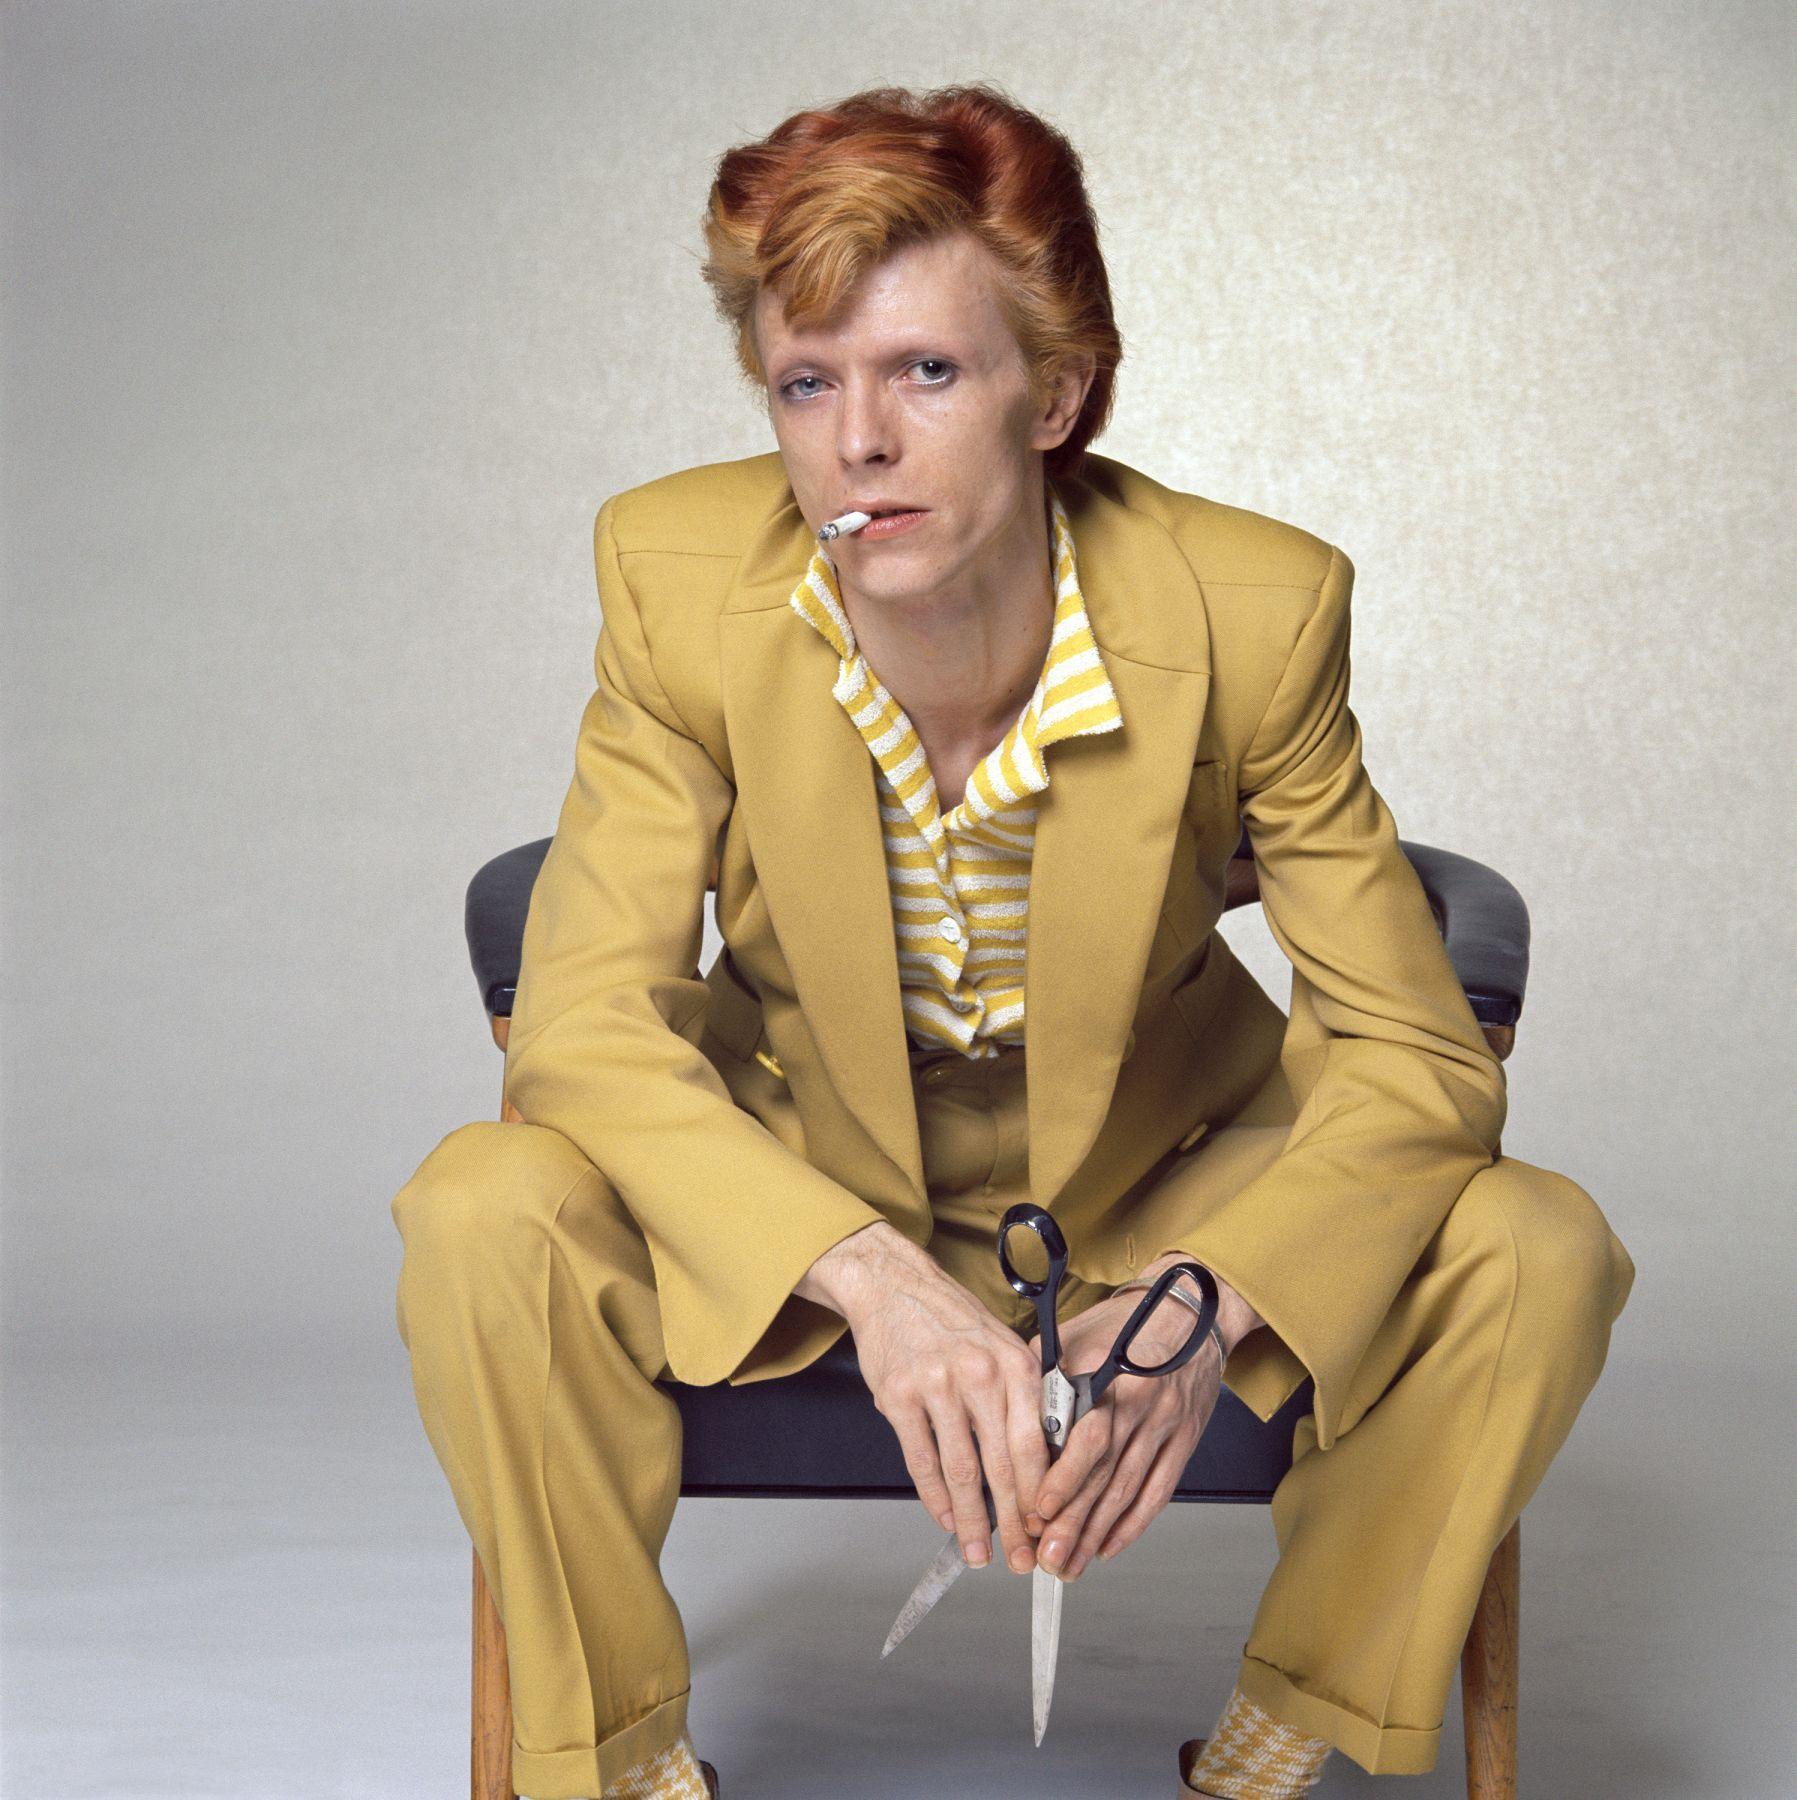 Terry O'Neill Color Photograph - David Bowie from the "Yellow Mustard Suit" Series (Signed)